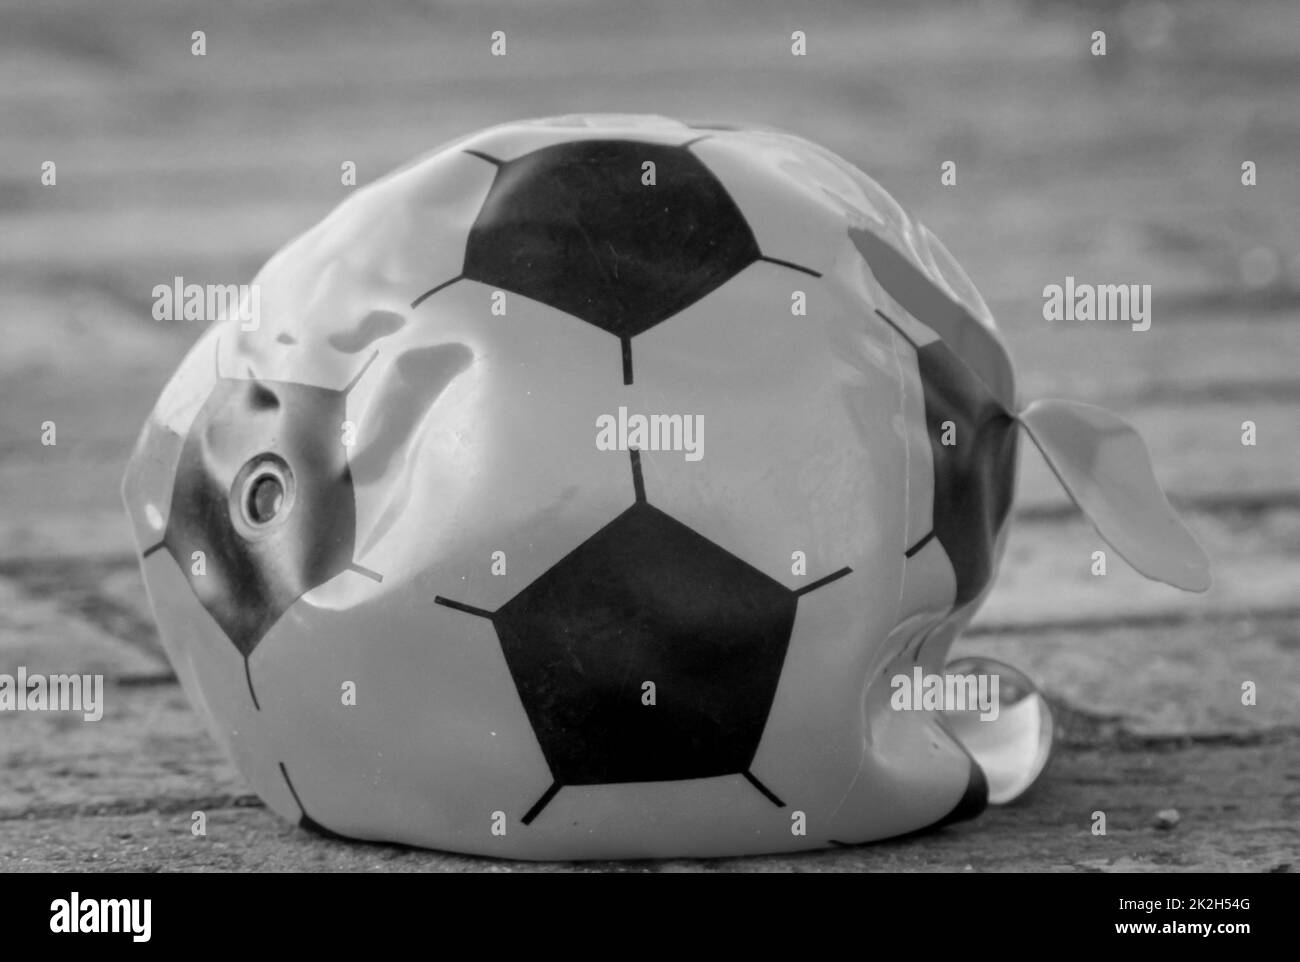 The air is out of a soccer. Stock Photo